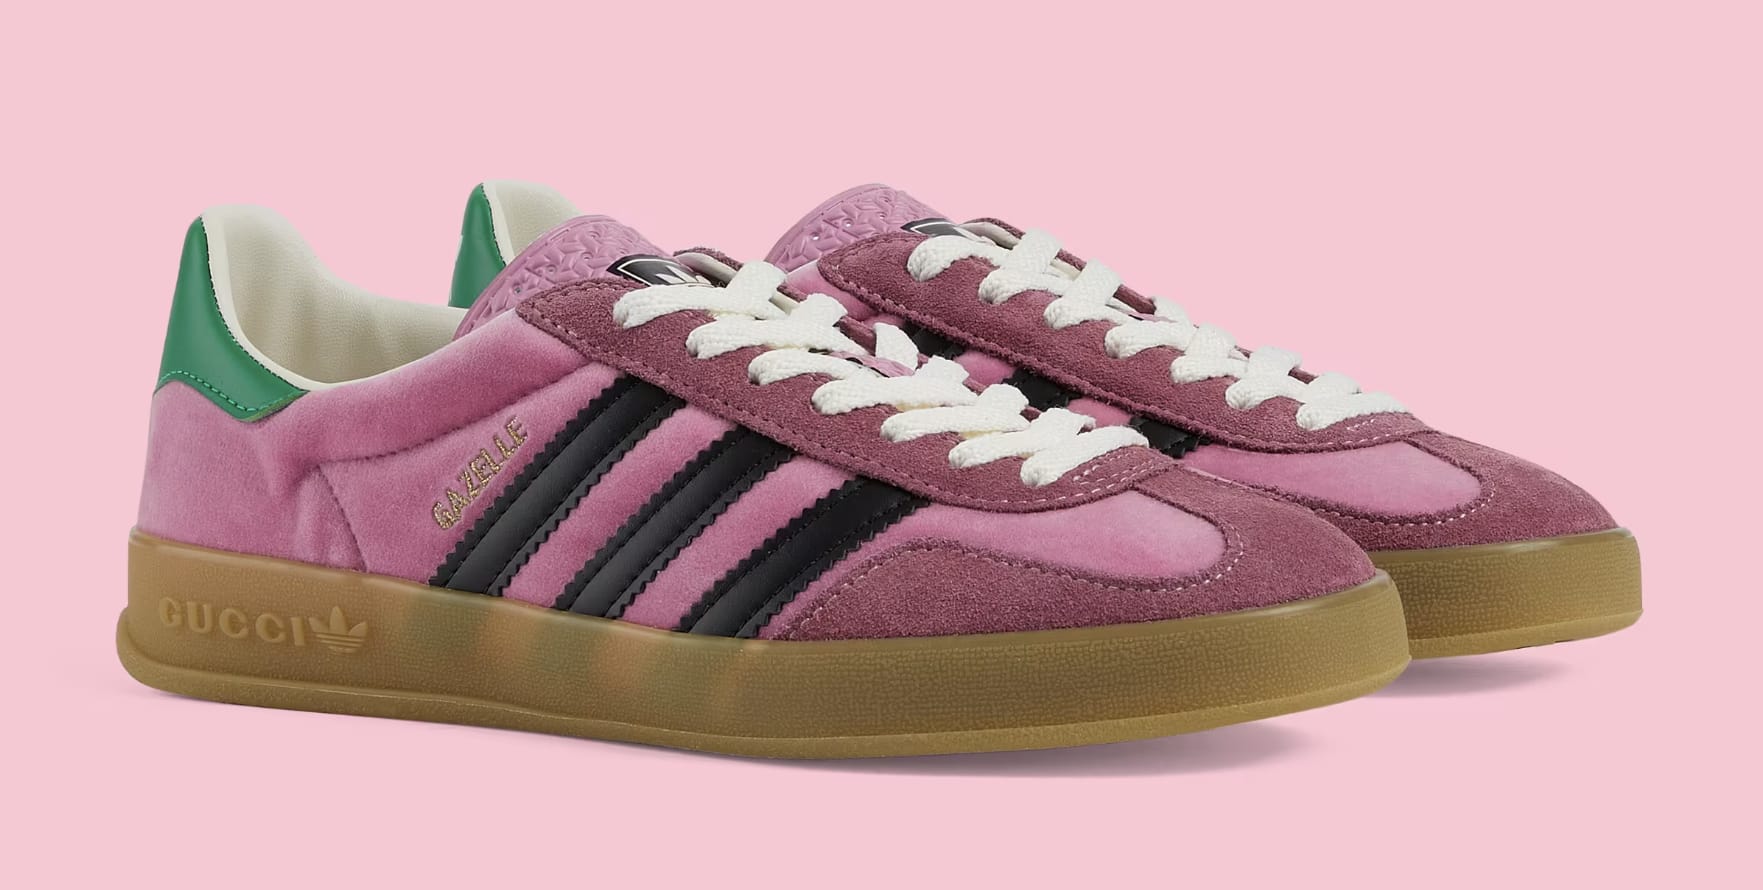 pivot Snooze Danube adidas x Gucci Gazelle Collection Release Date June 2022 | Sole Collector